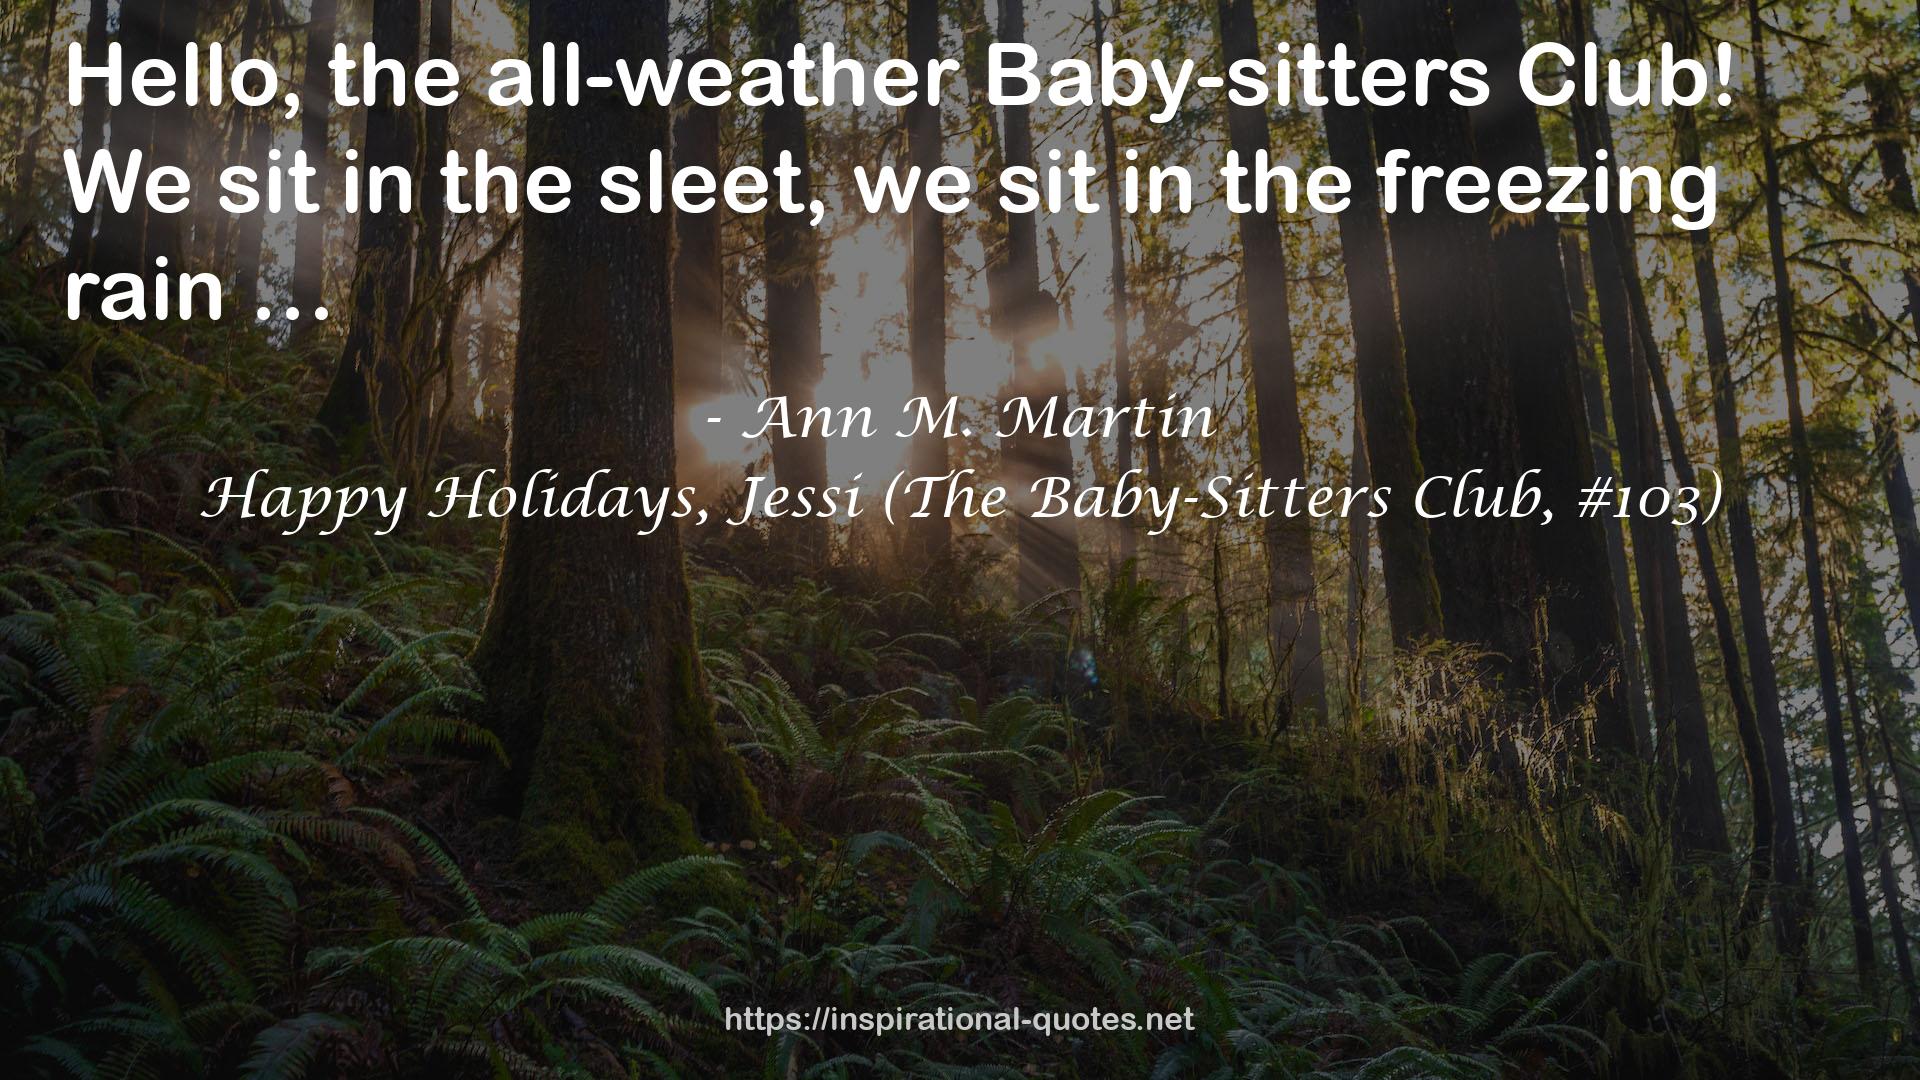 Happy Holidays, Jessi (The Baby-Sitters Club, #103) QUOTES